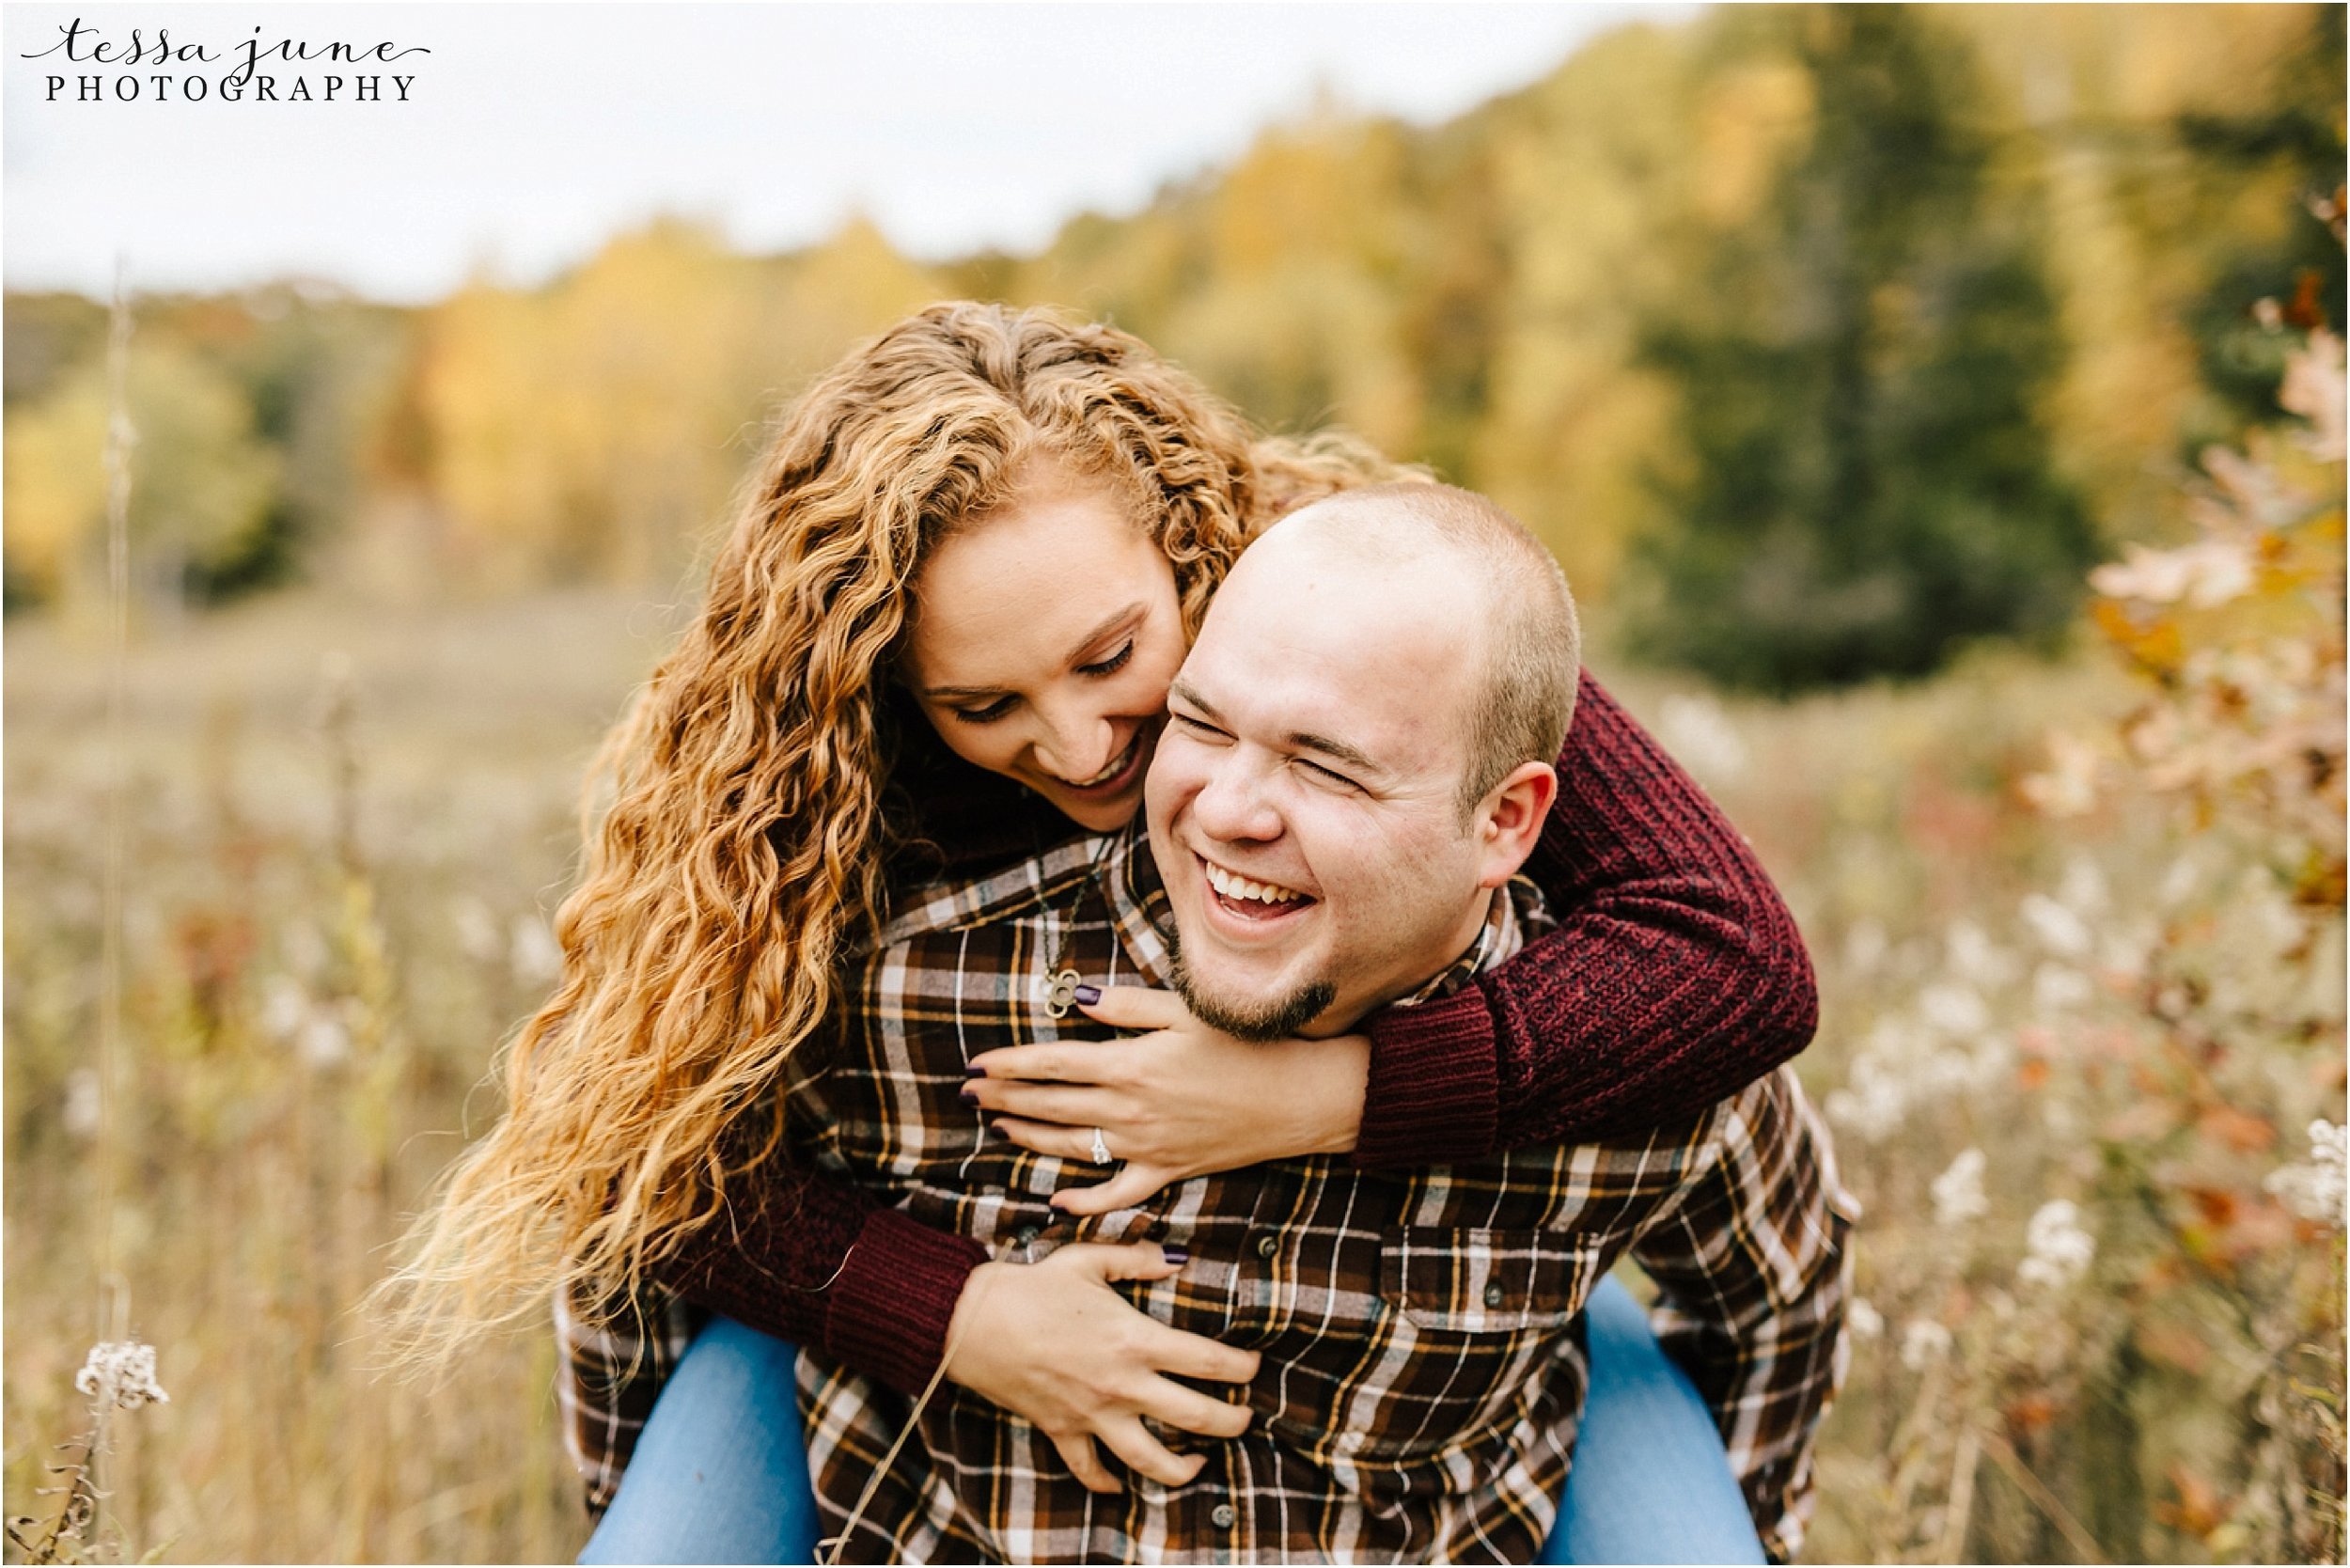 st-cloud-wedding-photographer-lake-maria-engagement-in-the-fall-19.jpg